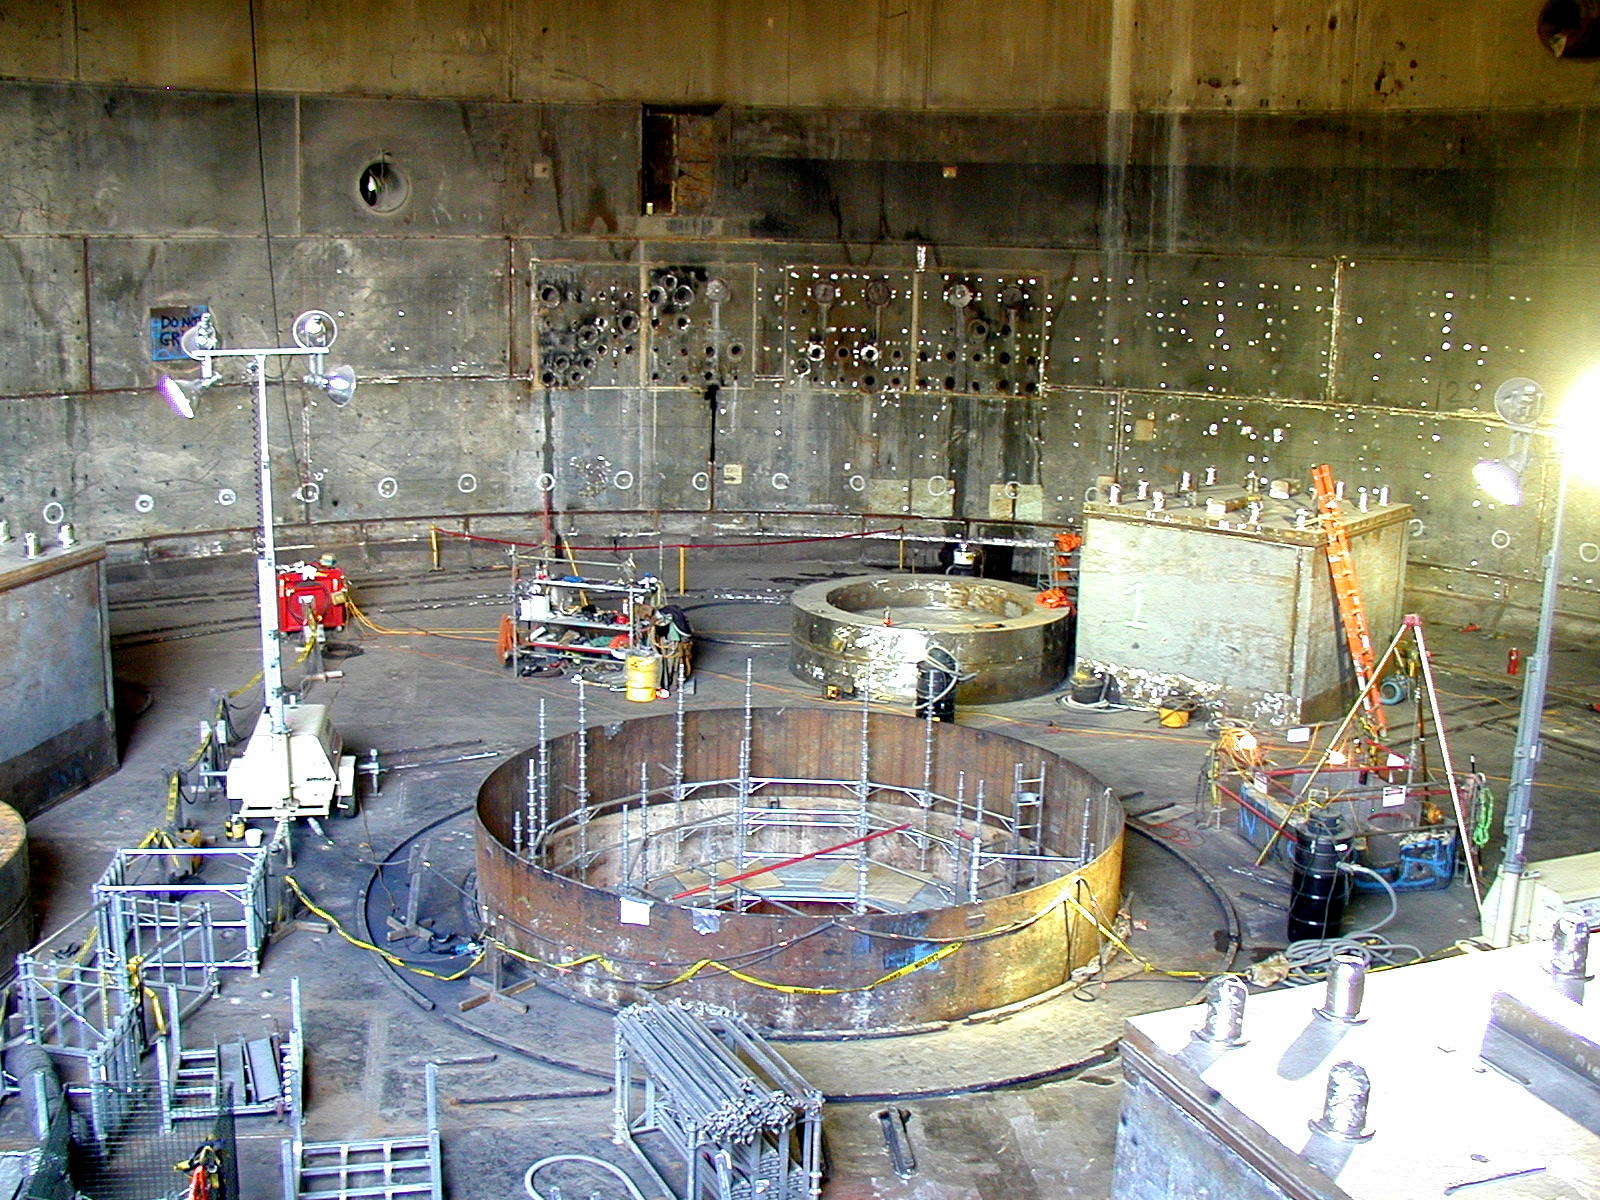 Containment Remediation
Shot of inside containment after remediation was complete. The ICI pit, in the center, has scaffolding setup in preparation for surveys.
Keywords: Maine Yankee Nuclear Power Plant (decommissioned) Decommissioning Remediation